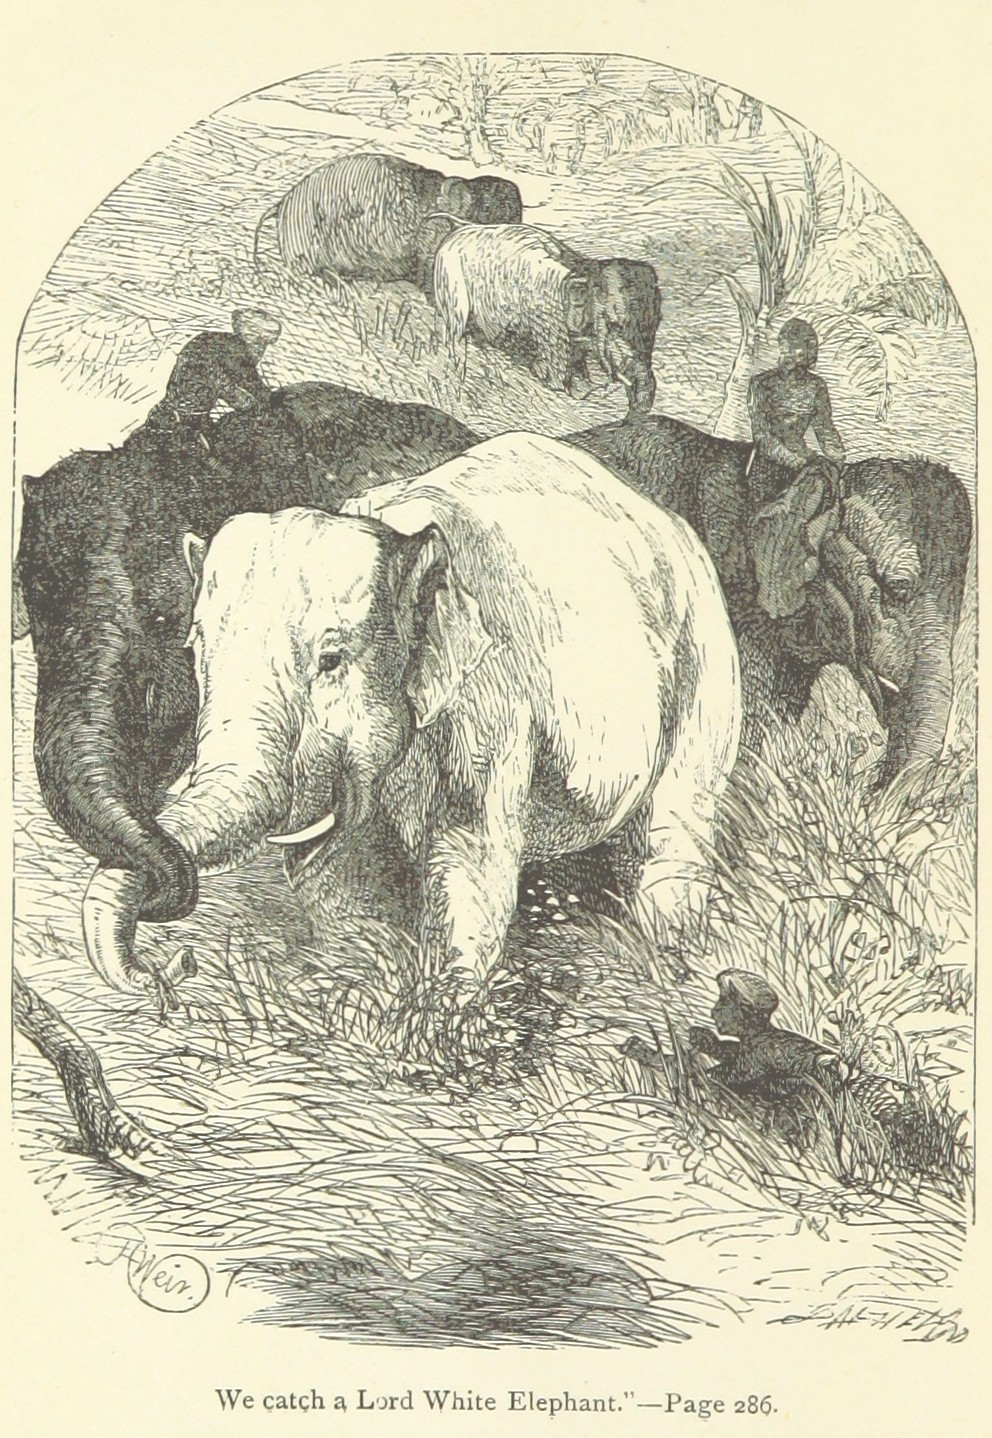 William Dalton, The White Elephant; or, the Hunters of Ava and the King of the Golden Foot (London: Griffith and Farran, 1888)